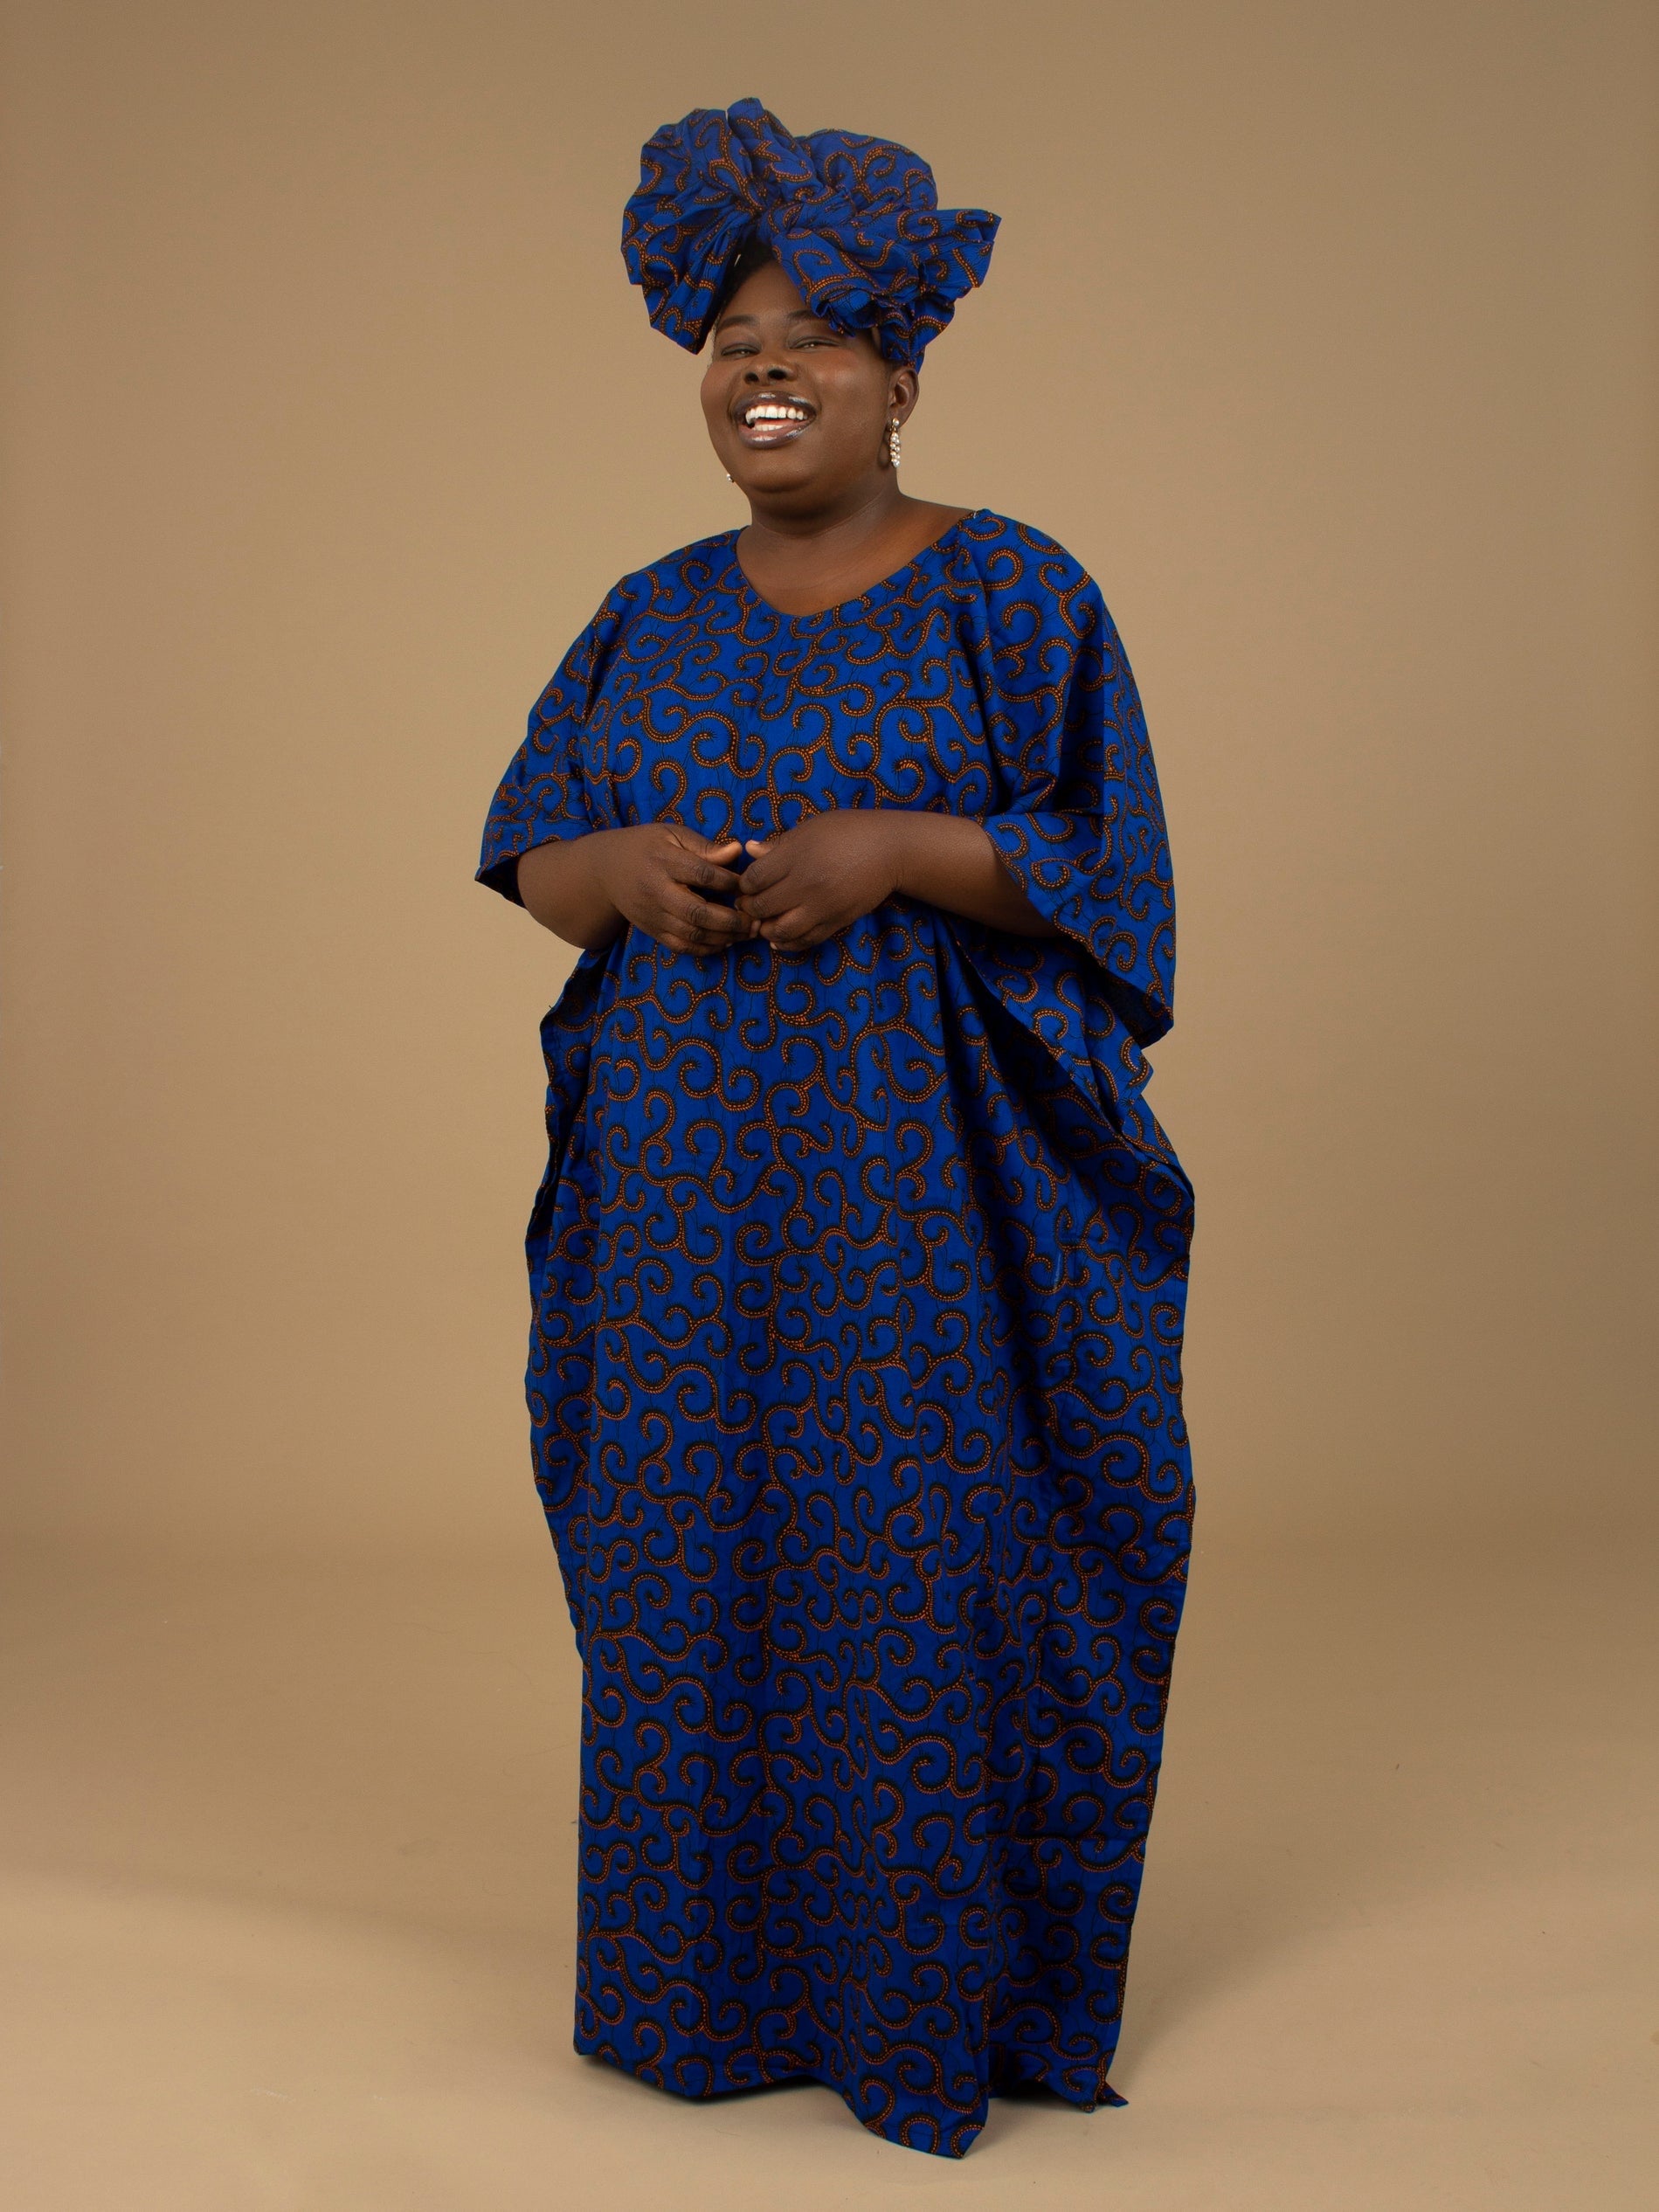 The Ore Floor Length lightweight African Print Kaftan Dress in Ankara wax print in a deep blue and orange swirling African Print pattern is ethically sourced cotton. Designed in England Made in Nigeria. 